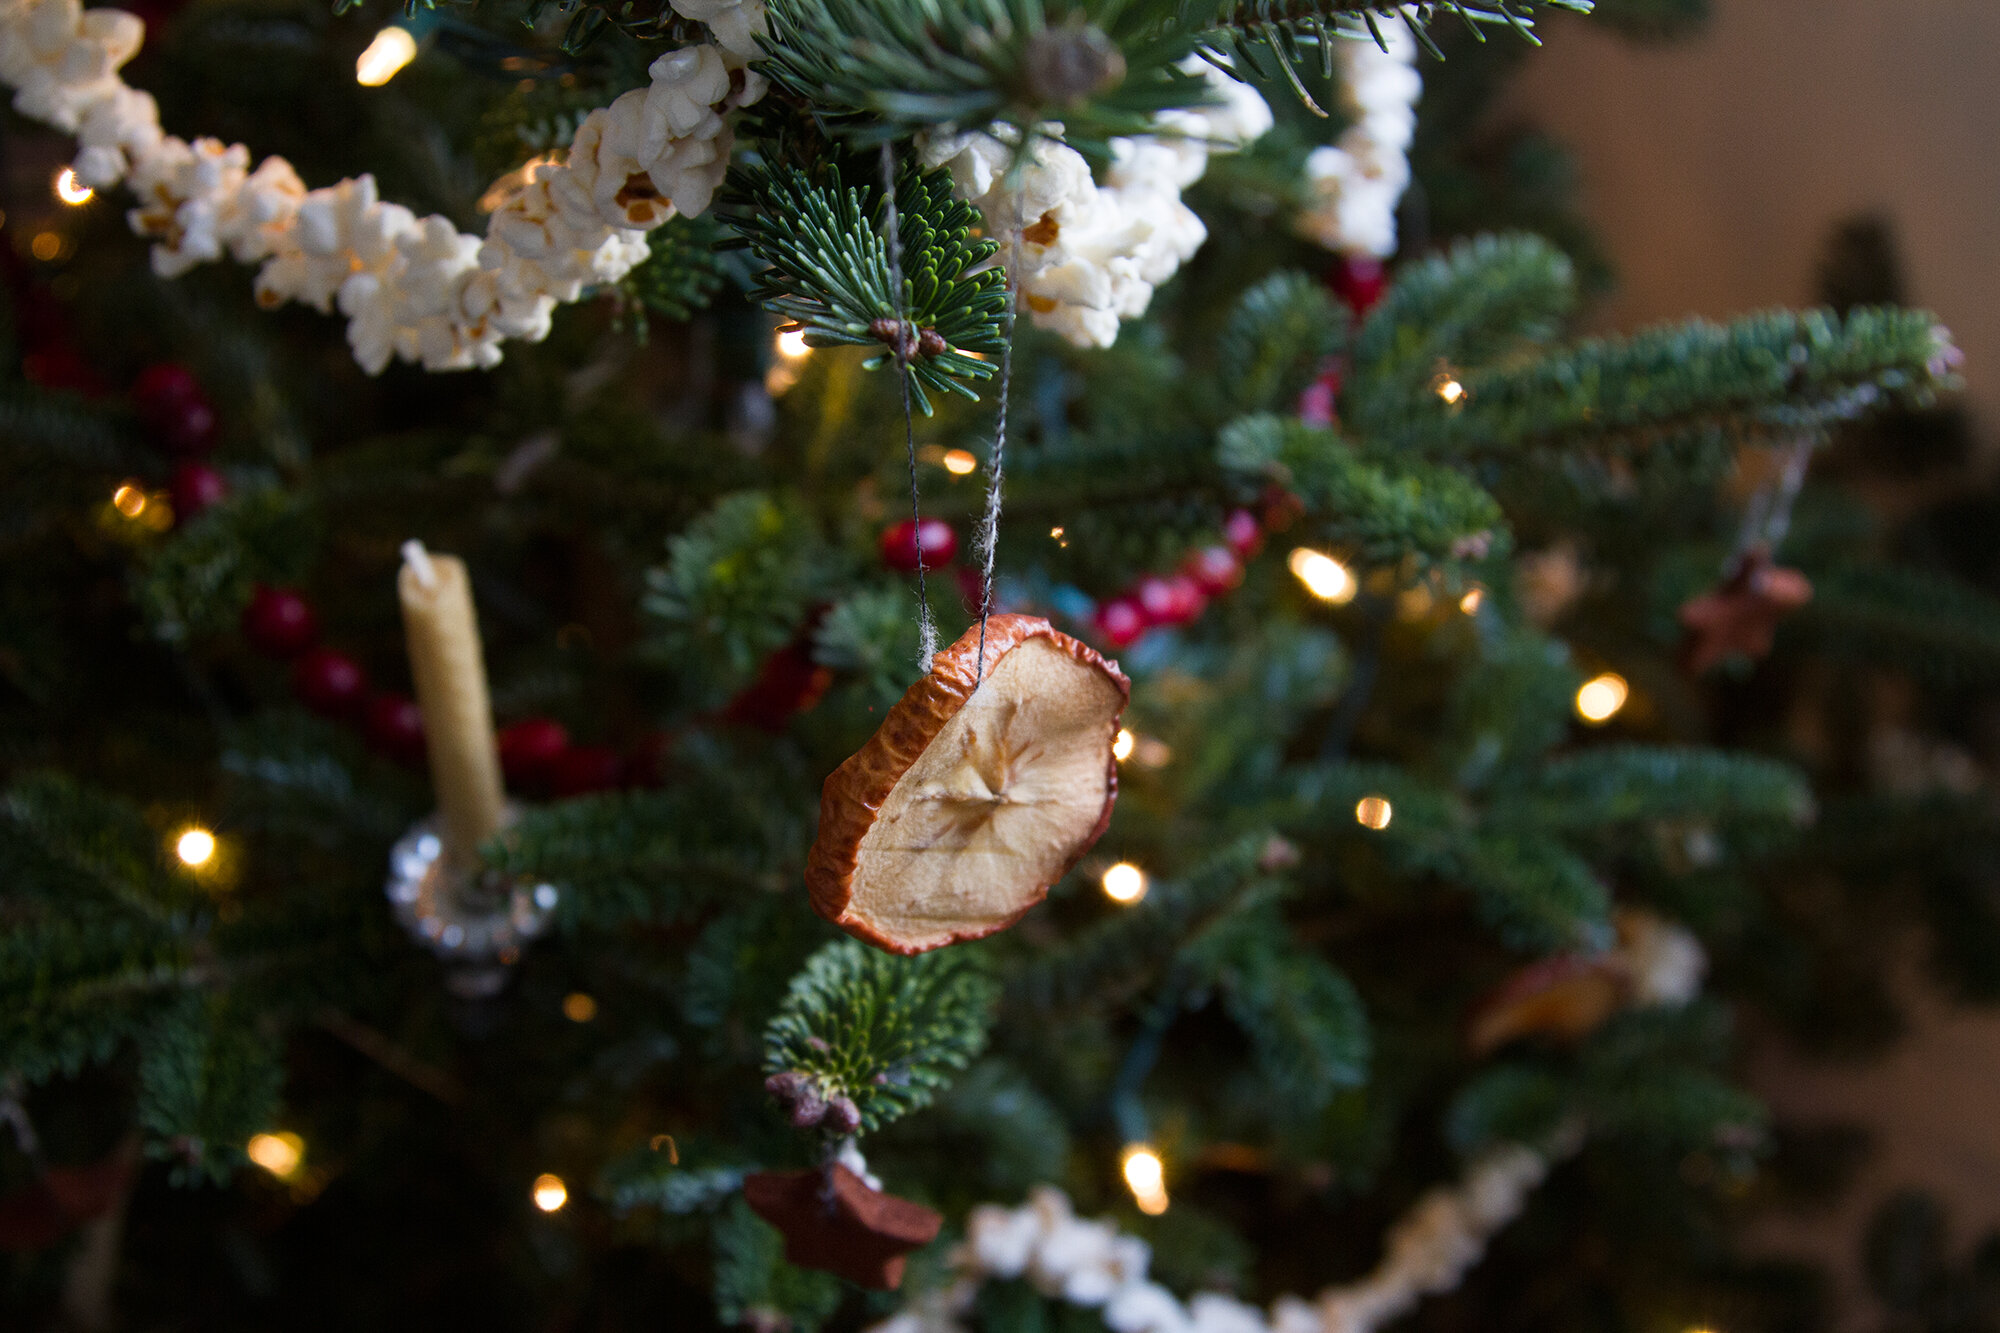 clutter free holiday decorations | reading my tea leaves